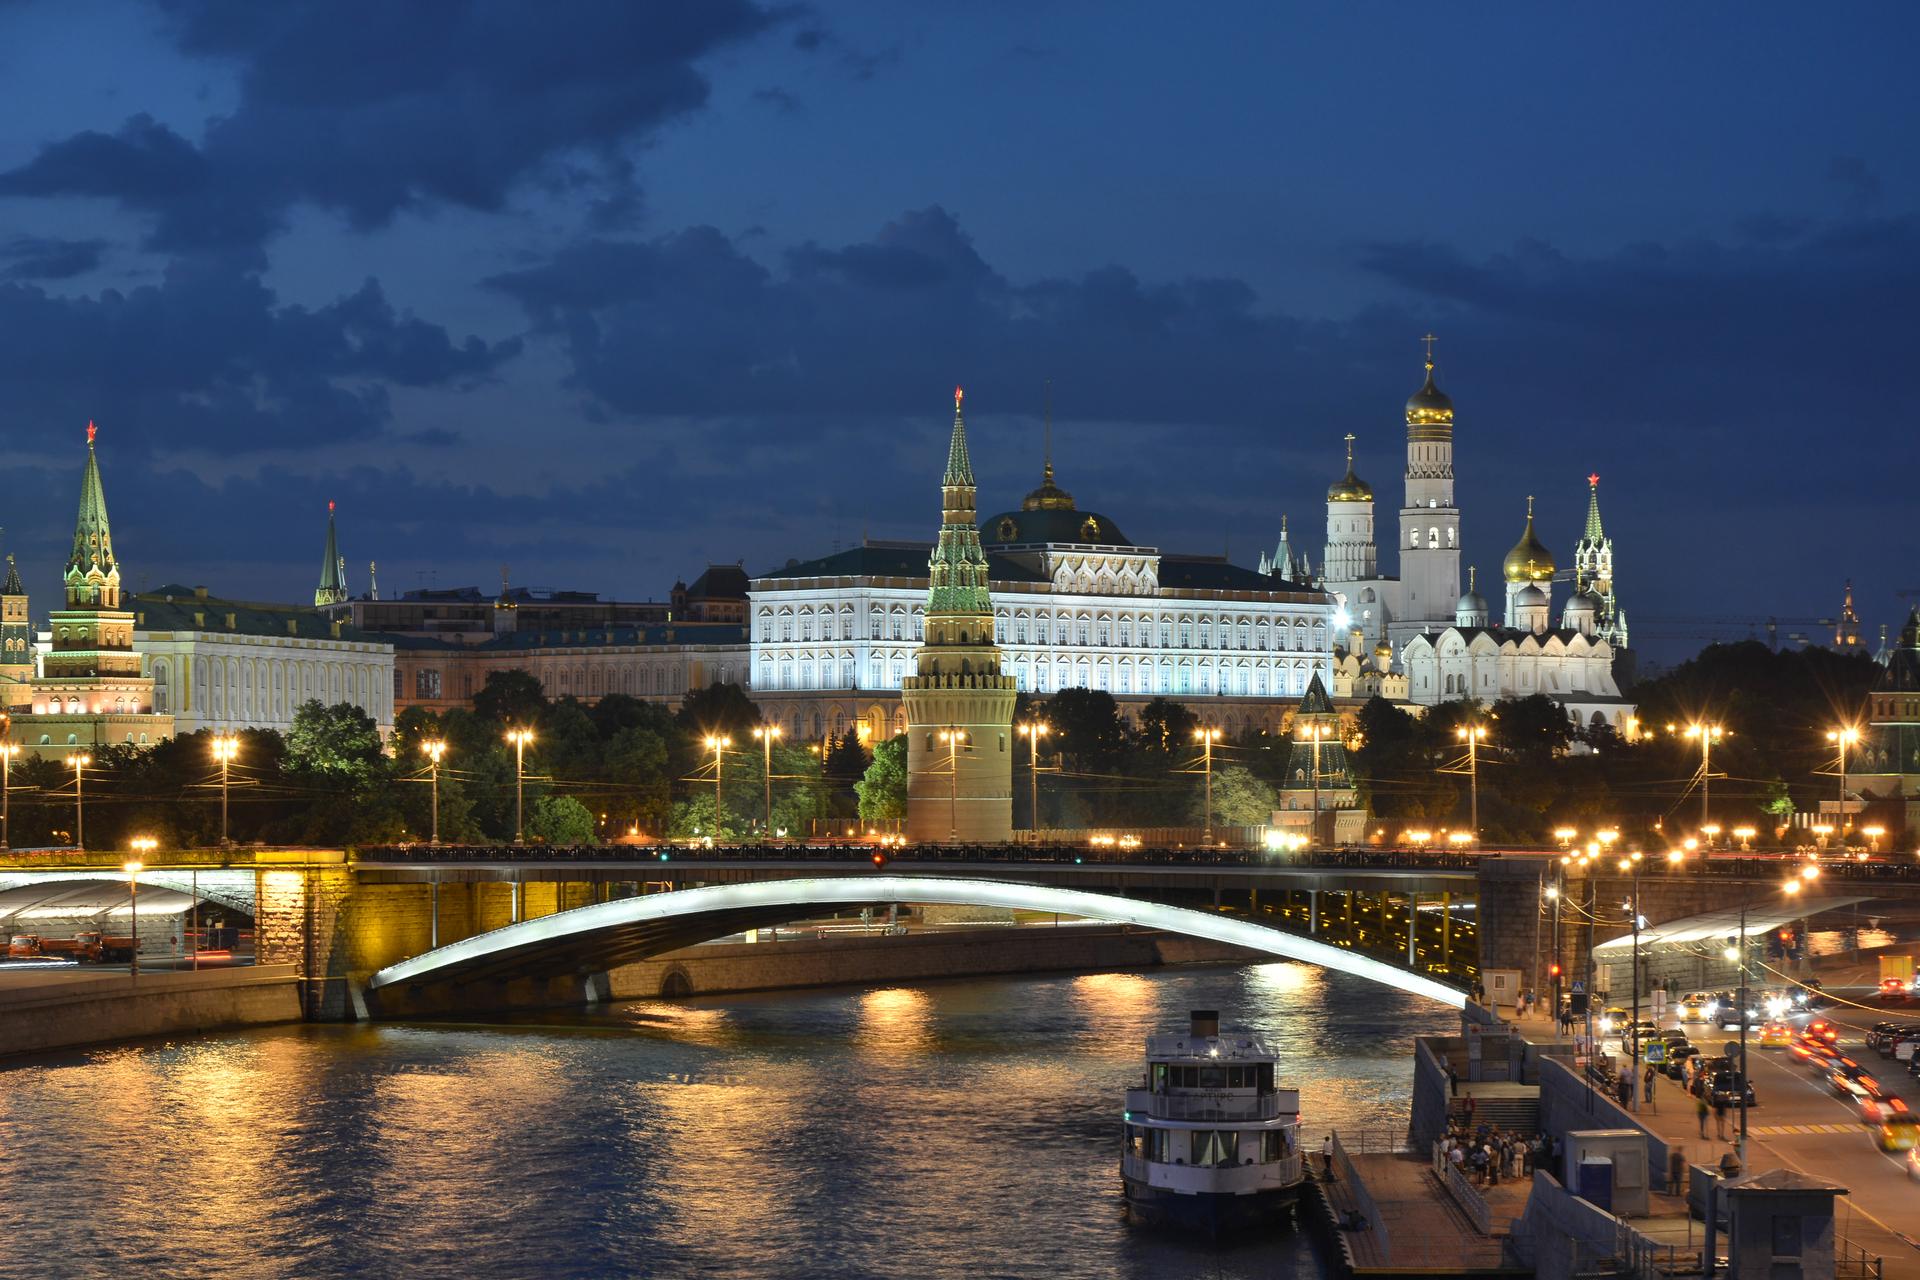 Moscow's Kremlin and the Bolshoy Kamenny Bridge are seen in the late evening.